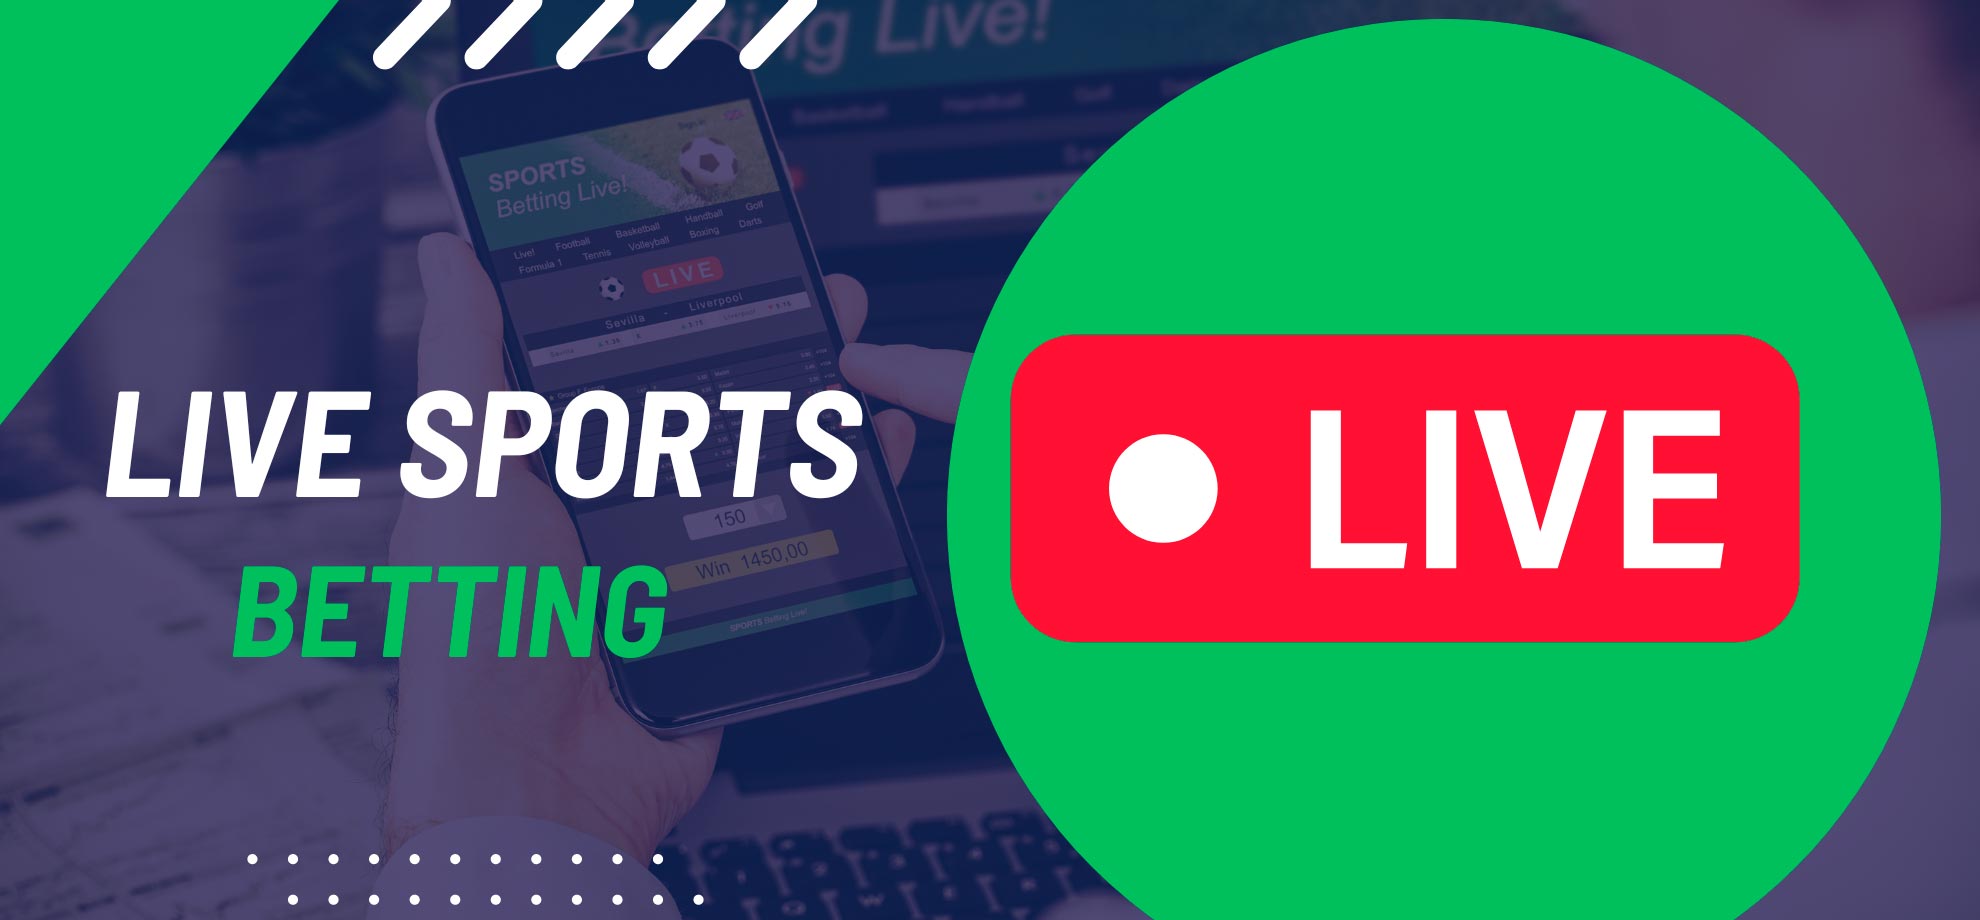 What is betting in Live